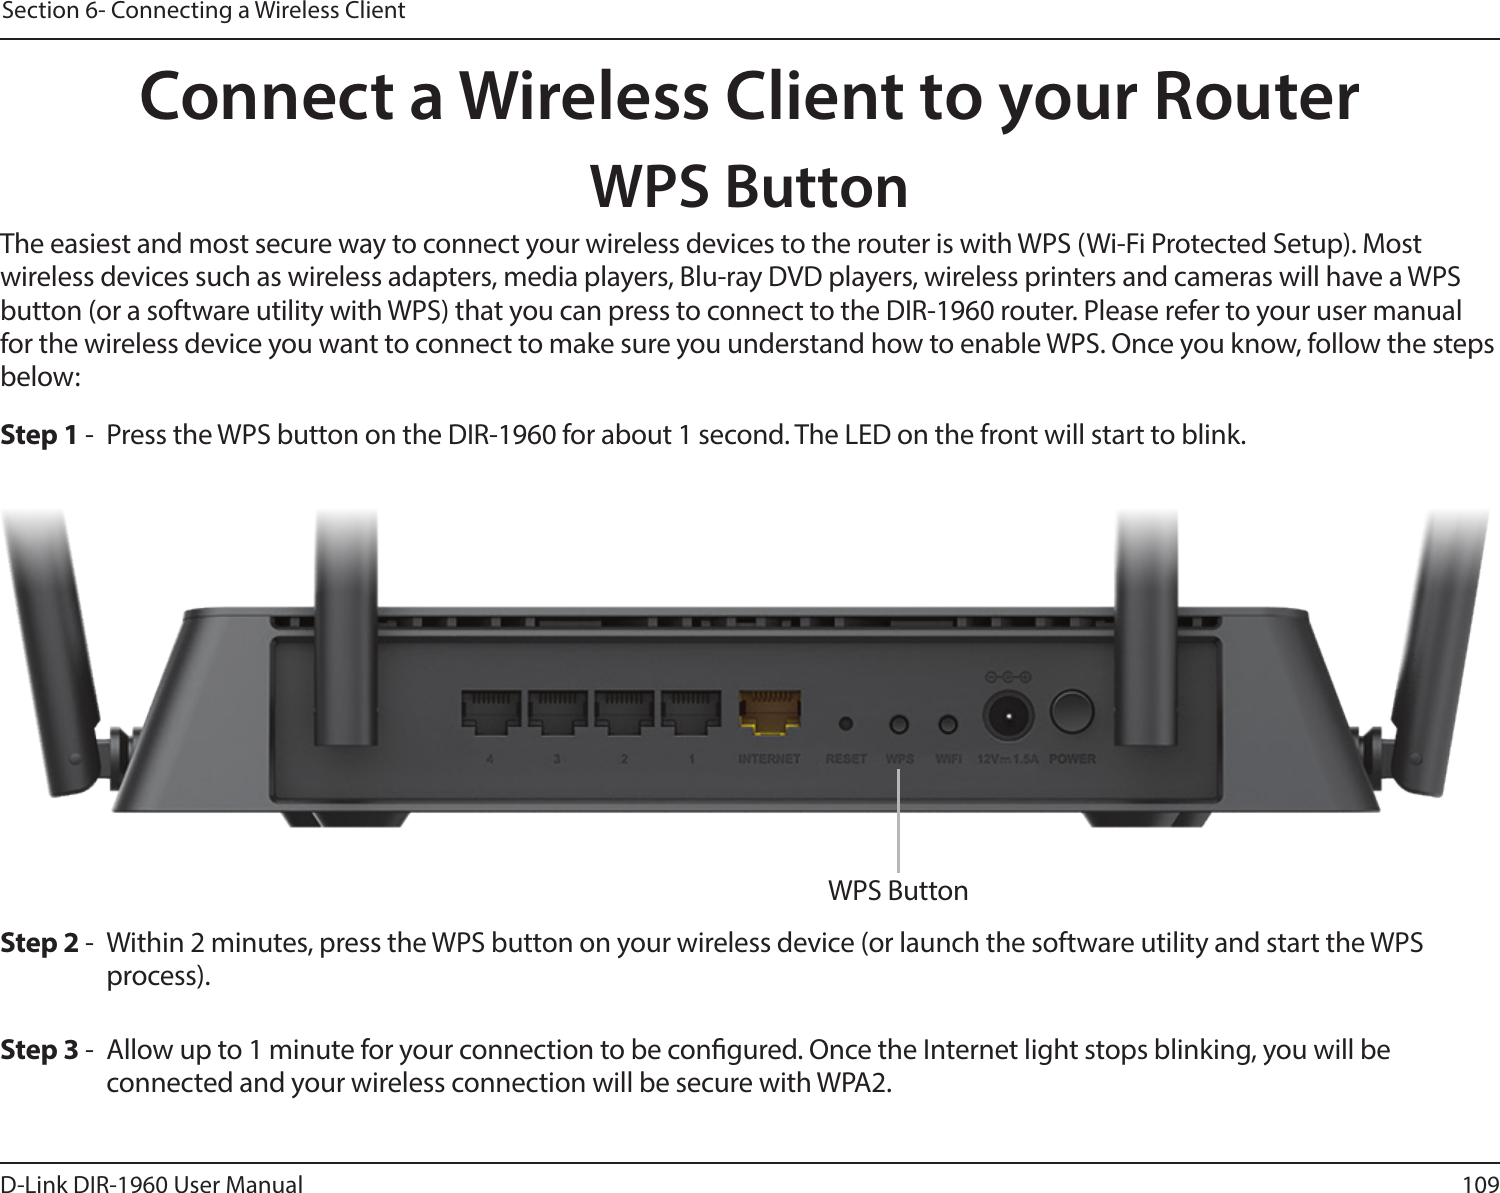 109D-Link DIR-1960 User ManualSection 6- Connecting a Wireless ClientConnect a Wireless Client to your RouterWPS ButtonStep 2 -  Within 2 minutes, press the WPS button on your wireless device (or launch the software utility and start the WPS process).The easiest and most secure way to connect your wireless devices to the router is with WPS (Wi-Fi Protected Setup). Most wireless devices such as wireless adapters, media players, Blu-ray DVD players, wireless printers and cameras will have a WPS button (or a software utility with WPS) that you can press to connect to the DIR-1960 router. Please refer to your user manual for the wireless device you want to connect to make sure you understand how to enable WPS. Once you know, follow the steps below:Step 1 -  Press the WPS button on the DIR-1960 for about 1 second. The LED on the front will start to blink.Step 3 -  Allow up to 1 minute for your connection to be congured. Once the Internet light stops blinking, you will be connected and your wireless connection will be secure with WPA2.WPS Button